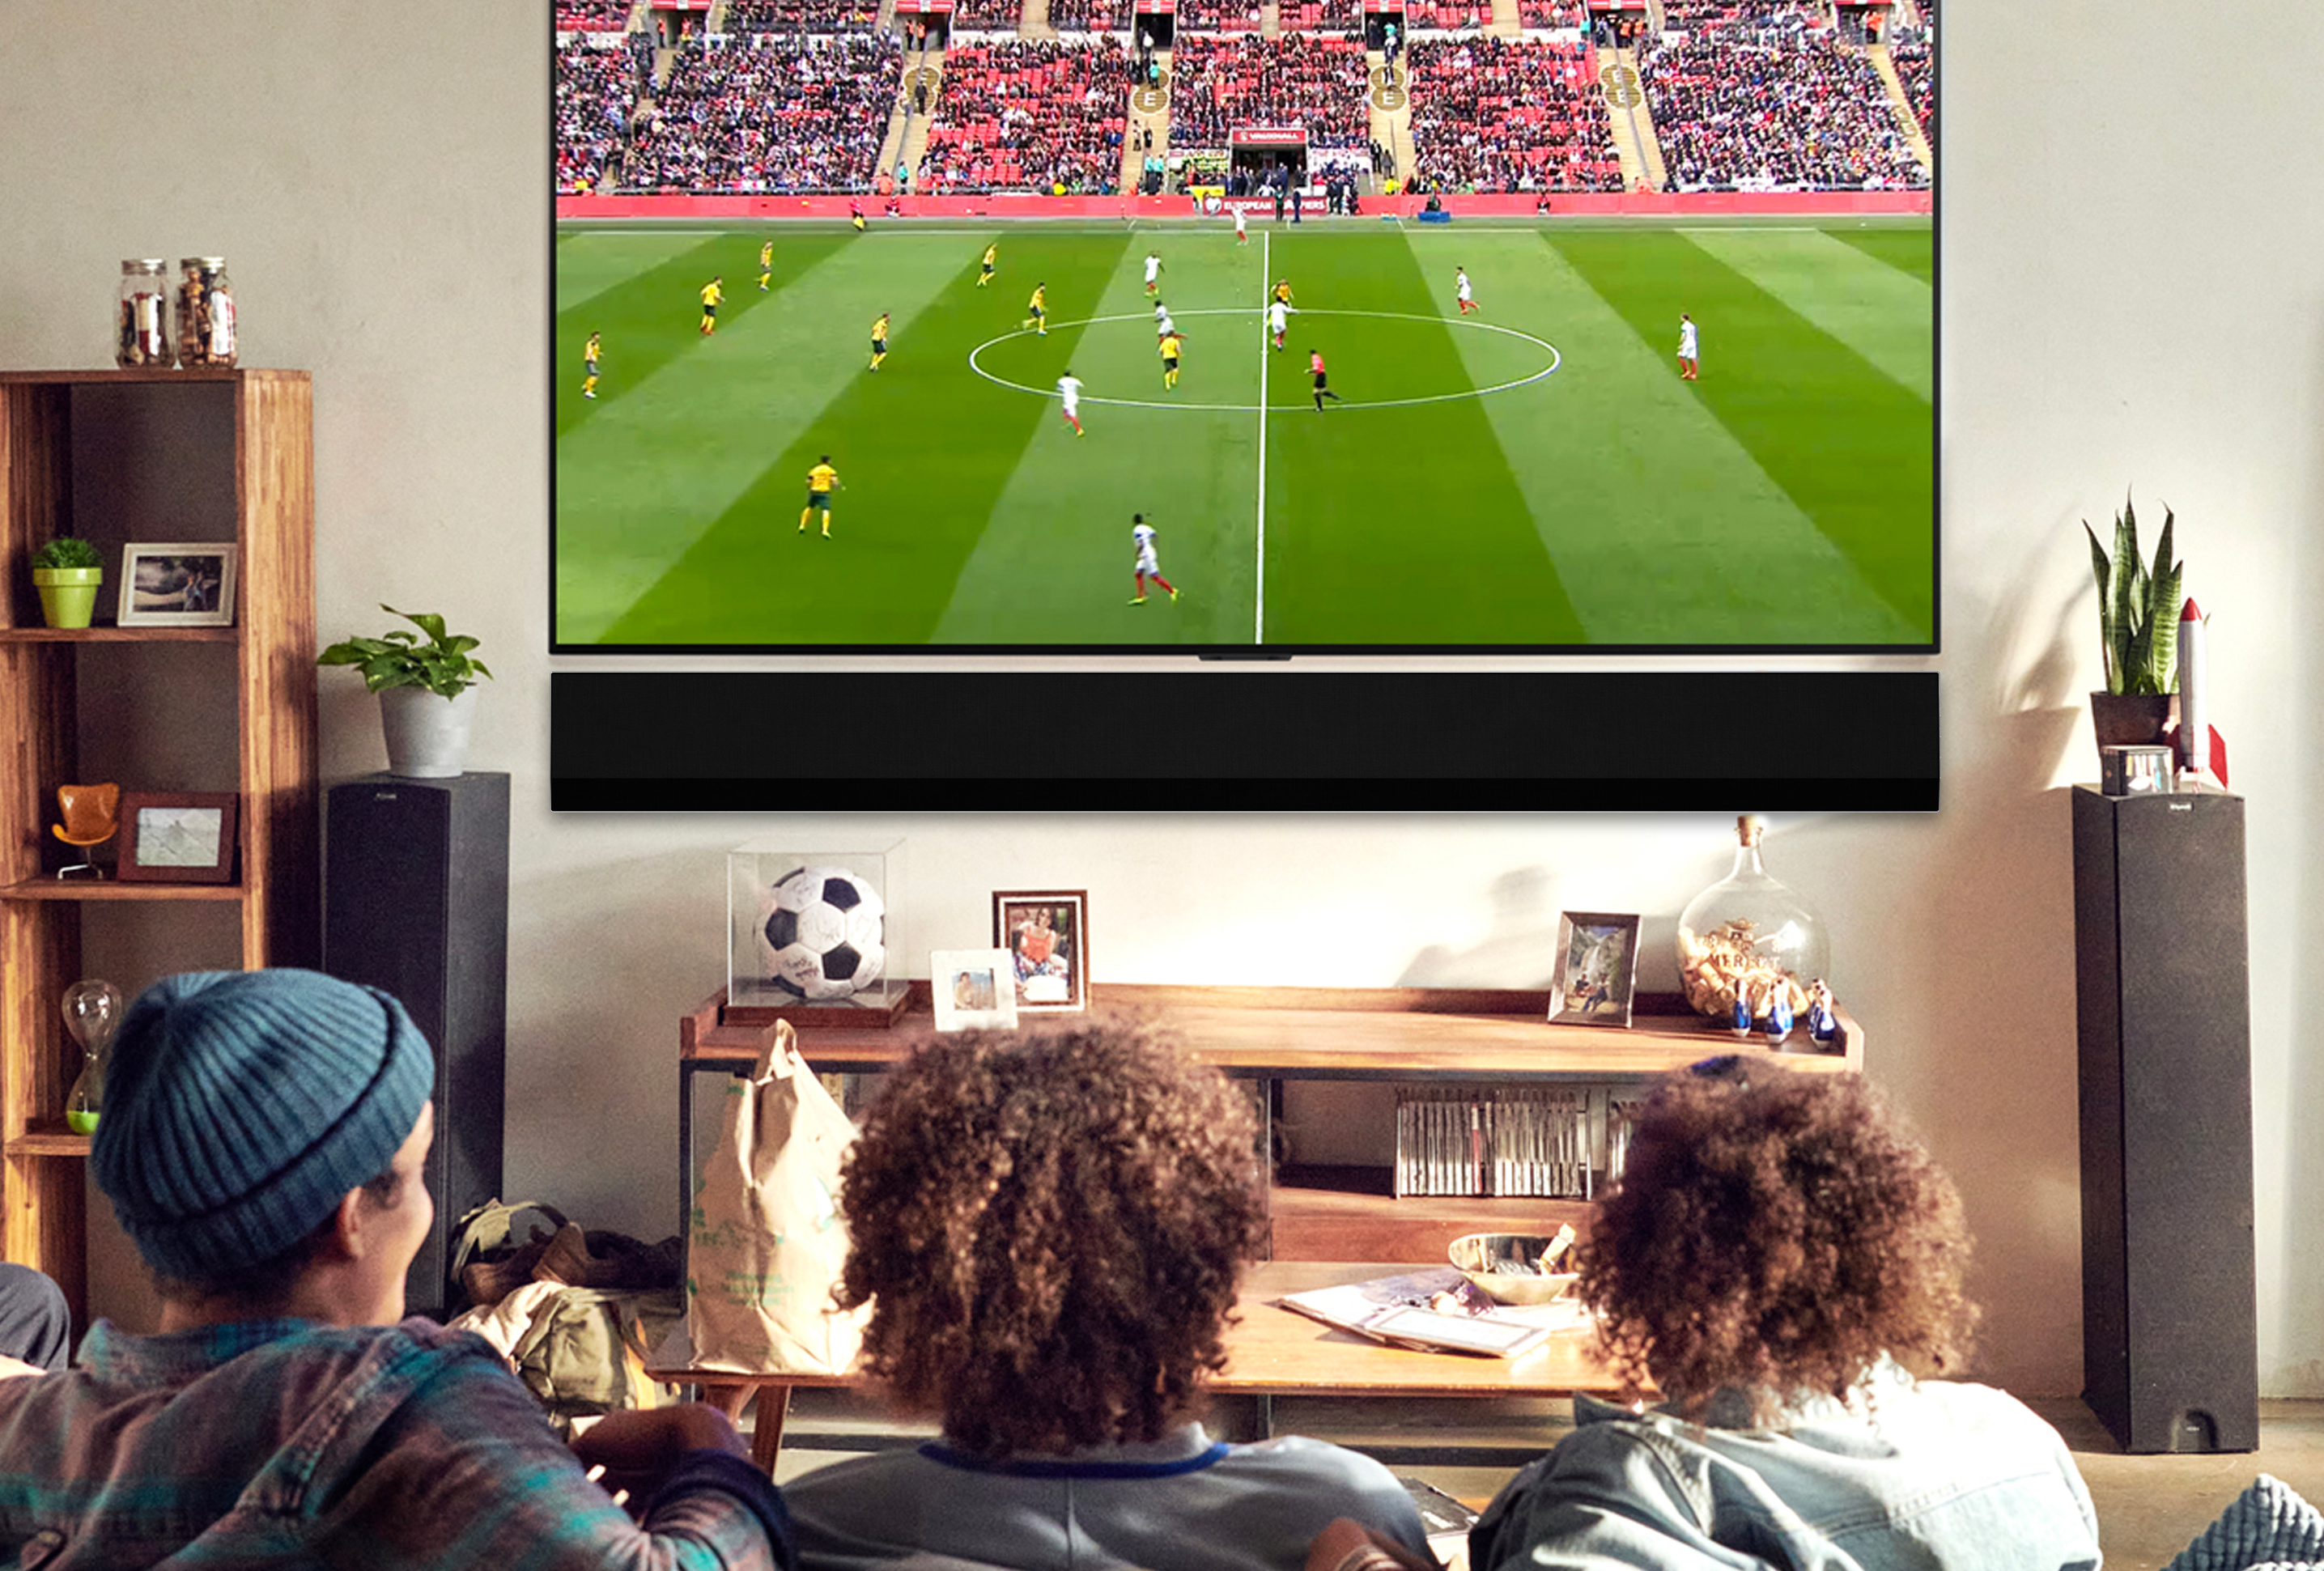 A group of men watch the football on a tv